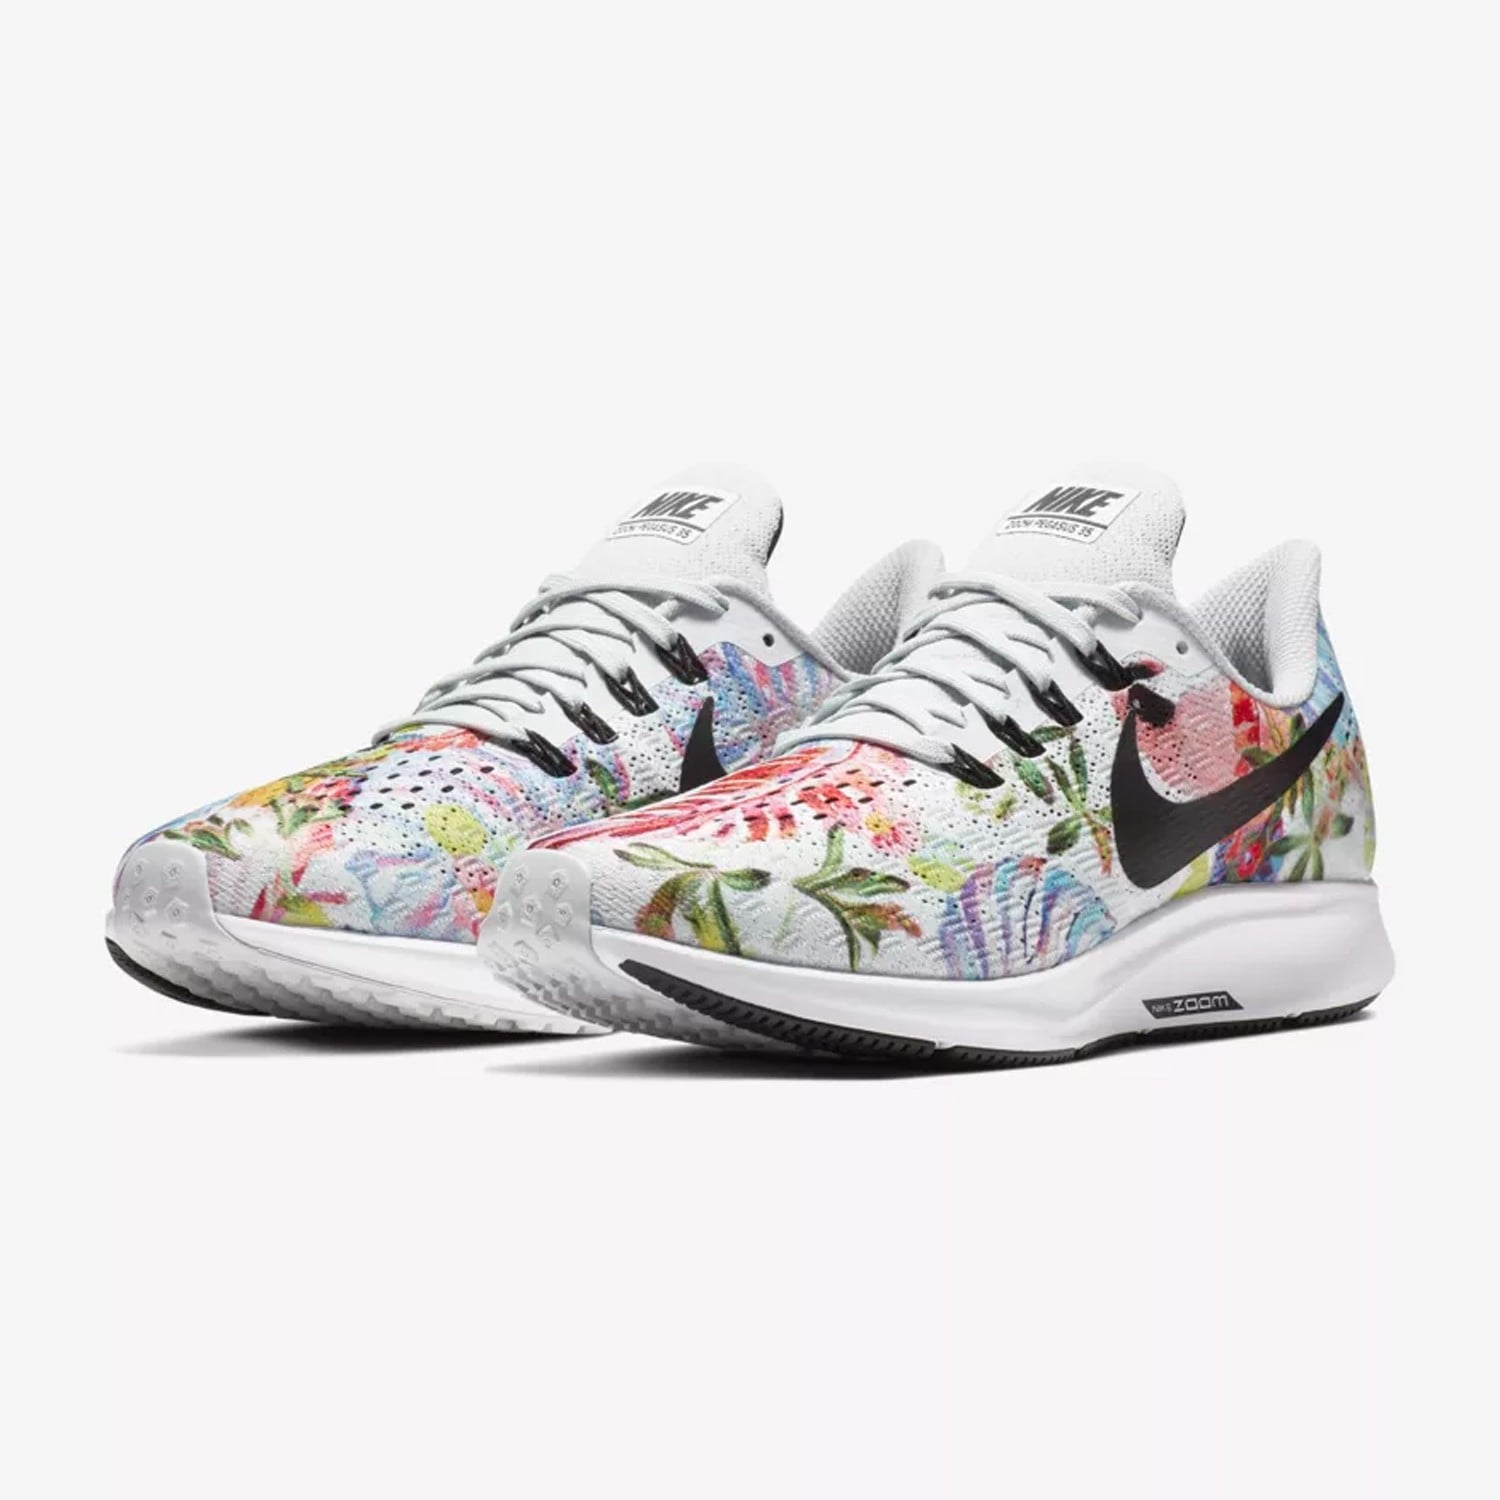 Compete stool Legacy Nike Floral Sneakers November 2018 | POPSUGAR Fitness